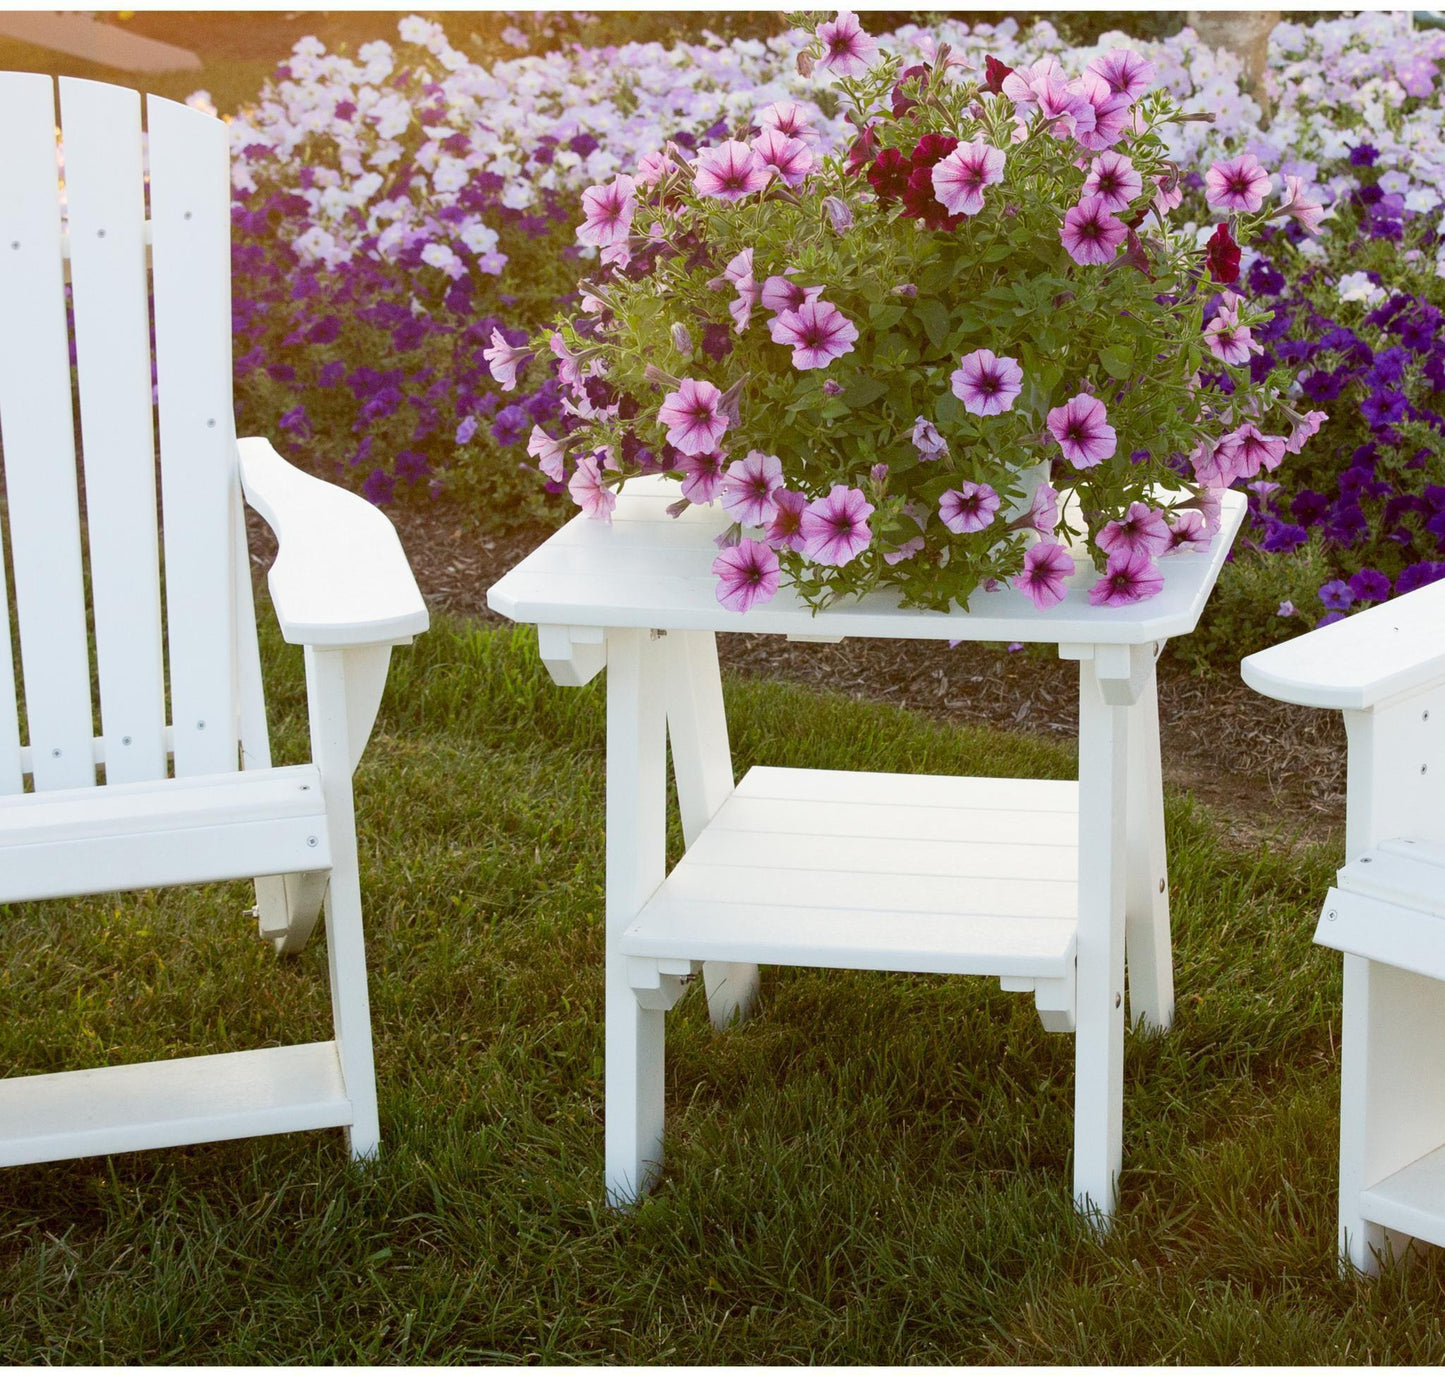 Wildridge LCC-112 Recycled Plastic Heritage Upright Adirondack Chair 3 Piece Set (QUICK SHIP) - LEAD TIME TO SHIP 3 TO 4 BUSINESS DAYS